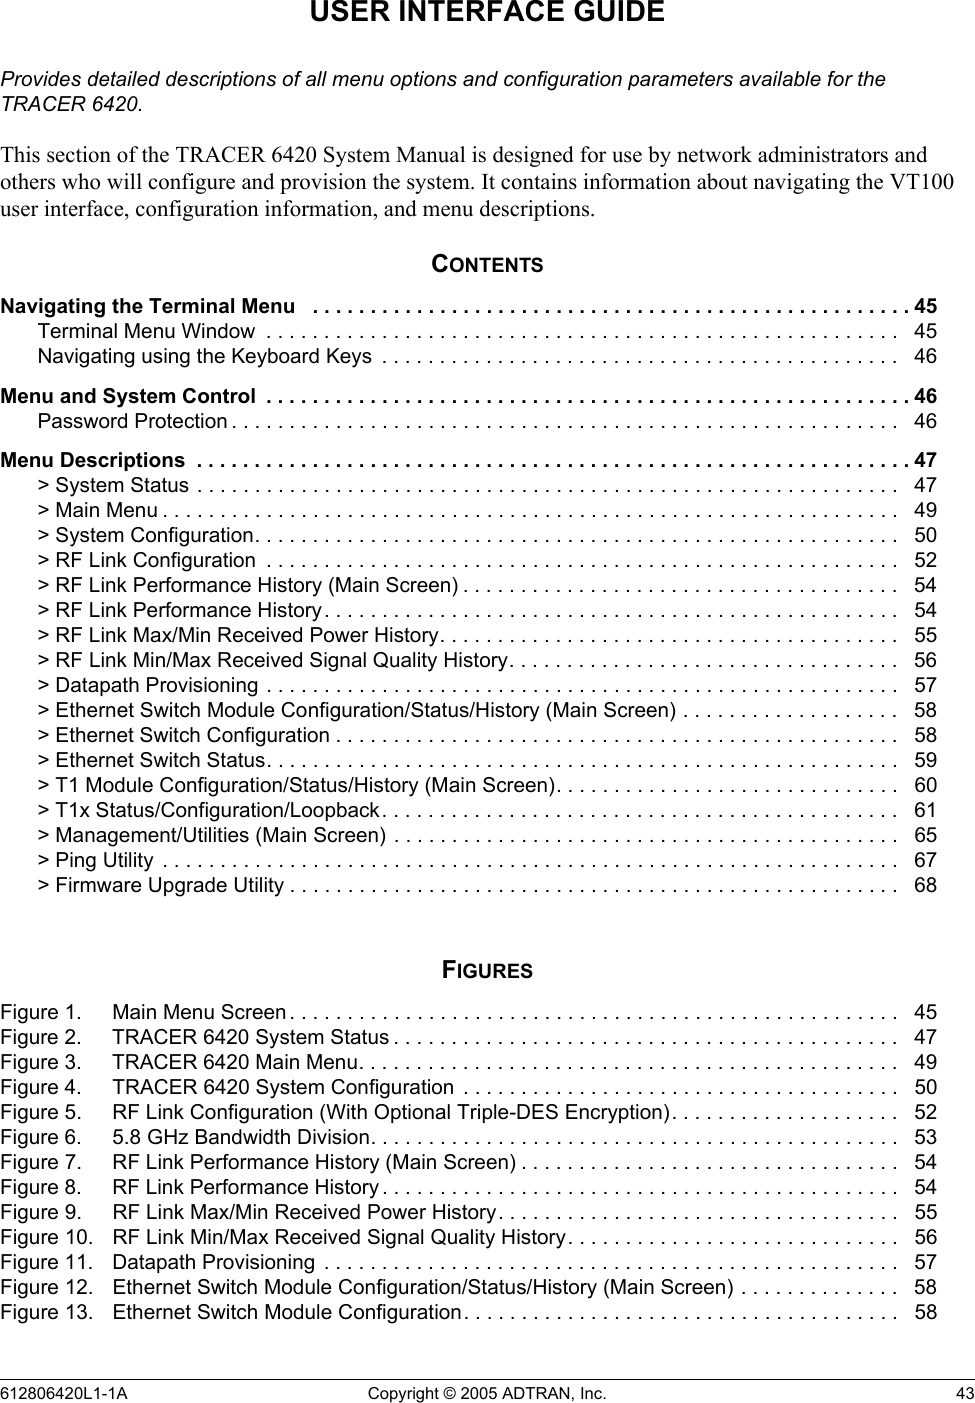 612806420L1-1A Copyright © 2005 ADTRAN, Inc.  43USER INTERFACE GUIDEProvides detailed descriptions of all menu options and configuration parameters available for the TRACER 6420.This section of the TRACER 6420 System Manual is designed for use by network administrators and others who will configure and provision the system. It contains information about navigating the VT100 user interface, configuration information, and menu descriptions.CONTENTSNavigating the Terminal Menu   . . . . . . . . . . . . . . . . . . . . . . . . . . . . . . . . . . . . . . . . . . . . . . . . . . . . 45Terminal Menu Window  . . . . . . . . . . . . . . . . . . . . . . . . . . . . . . . . . . . . . . . . . . . . . . . . . . . . . . .   45Navigating using the Keyboard Keys  . . . . . . . . . . . . . . . . . . . . . . . . . . . . . . . . . . . . . . . . . . . . .   46Menu and System Control  . . . . . . . . . . . . . . . . . . . . . . . . . . . . . . . . . . . . . . . . . . . . . . . . . . . . . . . . 46Password Protection . . . . . . . . . . . . . . . . . . . . . . . . . . . . . . . . . . . . . . . . . . . . . . . . . . . . . . . . . .   46Menu Descriptions  . . . . . . . . . . . . . . . . . . . . . . . . . . . . . . . . . . . . . . . . . . . . . . . . . . . . . . . . . . . . . . 47&gt; System Status . . . . . . . . . . . . . . . . . . . . . . . . . . . . . . . . . . . . . . . . . . . . . . . . . . . . . . . . . . . . .   47&gt; Main Menu . . . . . . . . . . . . . . . . . . . . . . . . . . . . . . . . . . . . . . . . . . . . . . . . . . . . . . . . . . . . . . . .   49&gt; System Configuration. . . . . . . . . . . . . . . . . . . . . . . . . . . . . . . . . . . . . . . . . . . . . . . . . . . . . . . .   50&gt; RF Link Configuration  . . . . . . . . . . . . . . . . . . . . . . . . . . . . . . . . . . . . . . . . . . . . . . . . . . . . . . .   52&gt; RF Link Performance History (Main Screen) . . . . . . . . . . . . . . . . . . . . . . . . . . . . . . . . . . . . . .   54&gt; RF Link Performance History . . . . . . . . . . . . . . . . . . . . . . . . . . . . . . . . . . . . . . . . . . . . . . . . . .  54&gt; RF Link Max/Min Received Power History. . . . . . . . . . . . . . . . . . . . . . . . . . . . . . . . . . . . . . . .   55&gt; RF Link Min/Max Received Signal Quality History. . . . . . . . . . . . . . . . . . . . . . . . . . . . . . . . . .   56&gt; Datapath Provisioning . . . . . . . . . . . . . . . . . . . . . . . . . . . . . . . . . . . . . . . . . . . . . . . . . . . . . . .   57&gt; Ethernet Switch Module Configuration/Status/History (Main Screen) . . . . . . . . . . . . . . . . . . .   58&gt; Ethernet Switch Configuration . . . . . . . . . . . . . . . . . . . . . . . . . . . . . . . . . . . . . . . . . . . . . . . . .  58&gt; Ethernet Switch Status. . . . . . . . . . . . . . . . . . . . . . . . . . . . . . . . . . . . . . . . . . . . . . . . . . . . . . .   59&gt; T1 Module Configuration/Status/History (Main Screen). . . . . . . . . . . . . . . . . . . . . . . . . . . . . .   60&gt; T1x Status/Configuration/Loopback. . . . . . . . . . . . . . . . . . . . . . . . . . . . . . . . . . . . . . . . . . . . .   61&gt; Management/Utilities (Main Screen) . . . . . . . . . . . . . . . . . . . . . . . . . . . . . . . . . . . . . . . . . . . .   65&gt; Ping Utility  . . . . . . . . . . . . . . . . . . . . . . . . . . . . . . . . . . . . . . . . . . . . . . . . . . . . . . . . . . . . . . . .   67&gt; Firmware Upgrade Utility . . . . . . . . . . . . . . . . . . . . . . . . . . . . . . . . . . . . . . . . . . . . . . . . . . . . .   68FIGURESFigure 1. Main Menu Screen . . . . . . . . . . . . . . . . . . . . . . . . . . . . . . . . . . . . . . . . . . . . . . . . . . . . .   45Figure 2. TRACER 6420 System Status . . . . . . . . . . . . . . . . . . . . . . . . . . . . . . . . . . . . . . . . . . . .   47Figure 3. TRACER 6420 Main Menu. . . . . . . . . . . . . . . . . . . . . . . . . . . . . . . . . . . . . . . . . . . . . . .   49Figure 4. TRACER 6420 System Configuration  . . . . . . . . . . . . . . . . . . . . . . . . . . . . . . . . . . . . . .   50Figure 5. RF Link Configuration (With Optional Triple-DES Encryption). . . . . . . . . . . . . . . . . . . .   52Figure 6. 5.8 GHz Bandwidth Division. . . . . . . . . . . . . . . . . . . . . . . . . . . . . . . . . . . . . . . . . . . . . .   53Figure 7. RF Link Performance History (Main Screen) . . . . . . . . . . . . . . . . . . . . . . . . . . . . . . . . .   54Figure 8. RF Link Performance History . . . . . . . . . . . . . . . . . . . . . . . . . . . . . . . . . . . . . . . . . . . . .   54Figure 9. RF Link Max/Min Received Power History. . . . . . . . . . . . . . . . . . . . . . . . . . . . . . . . . . .   55Figure 10. RF Link Min/Max Received Signal Quality History. . . . . . . . . . . . . . . . . . . . . . . . . . . . .   56Figure 11. Datapath Provisioning  . . . . . . . . . . . . . . . . . . . . . . . . . . . . . . . . . . . . . . . . . . . . . . . . . .   57Figure 12. Ethernet Switch Module Configuration/Status/History (Main Screen) . . . . . . . . . . . . . .   58Figure 13. Ethernet Switch Module Configuration. . . . . . . . . . . . . . . . . . . . . . . . . . . . . . . . . . . . . .   58